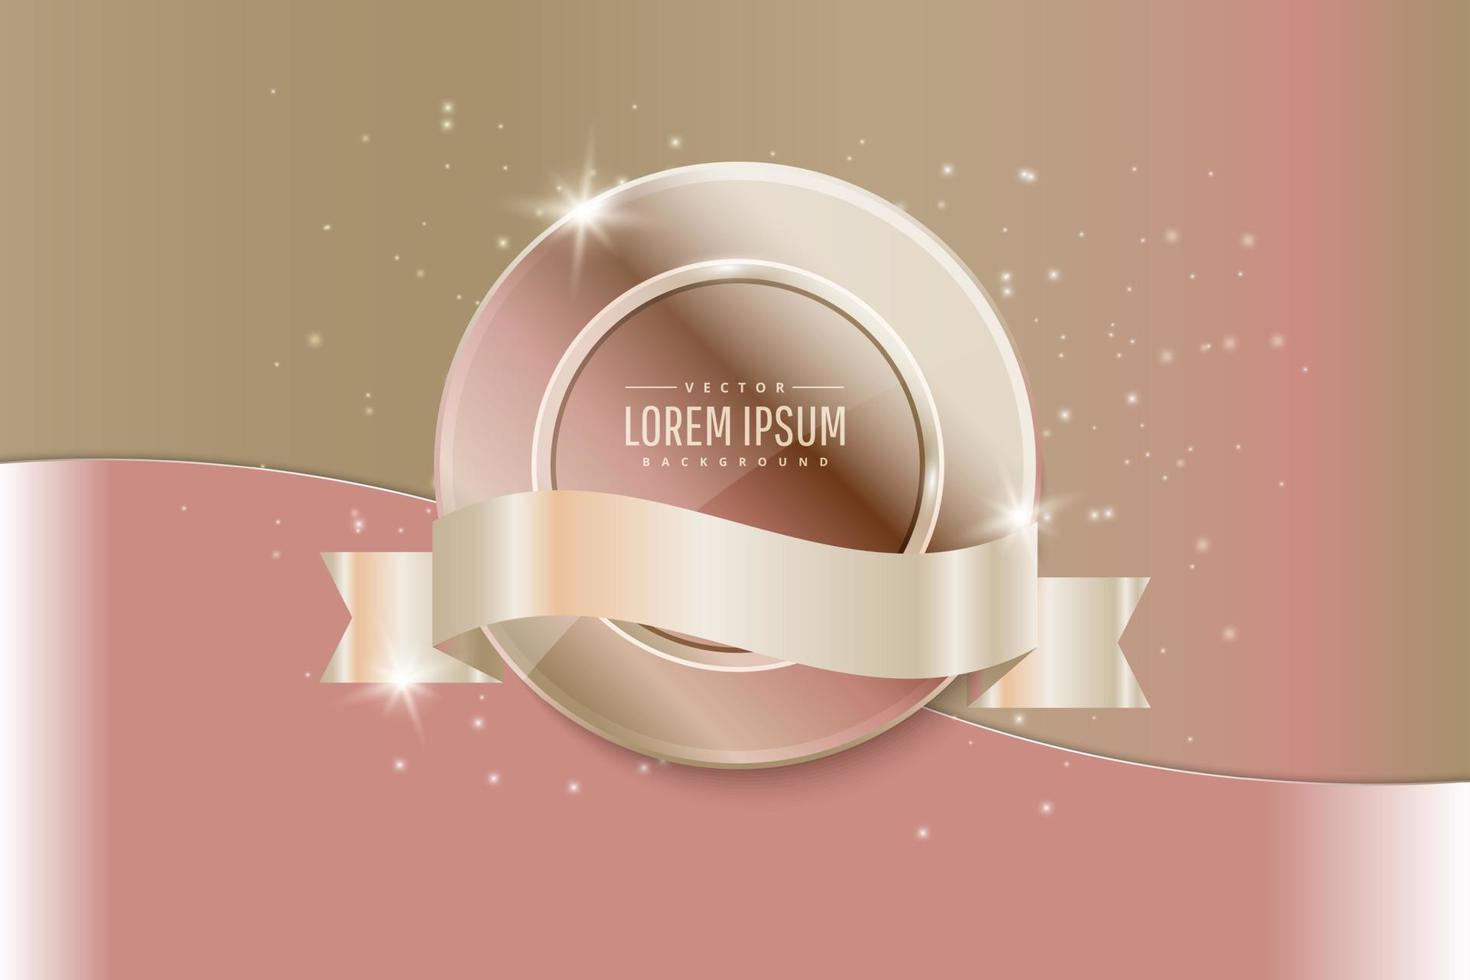 Luxury pink background with shiny label design element vector